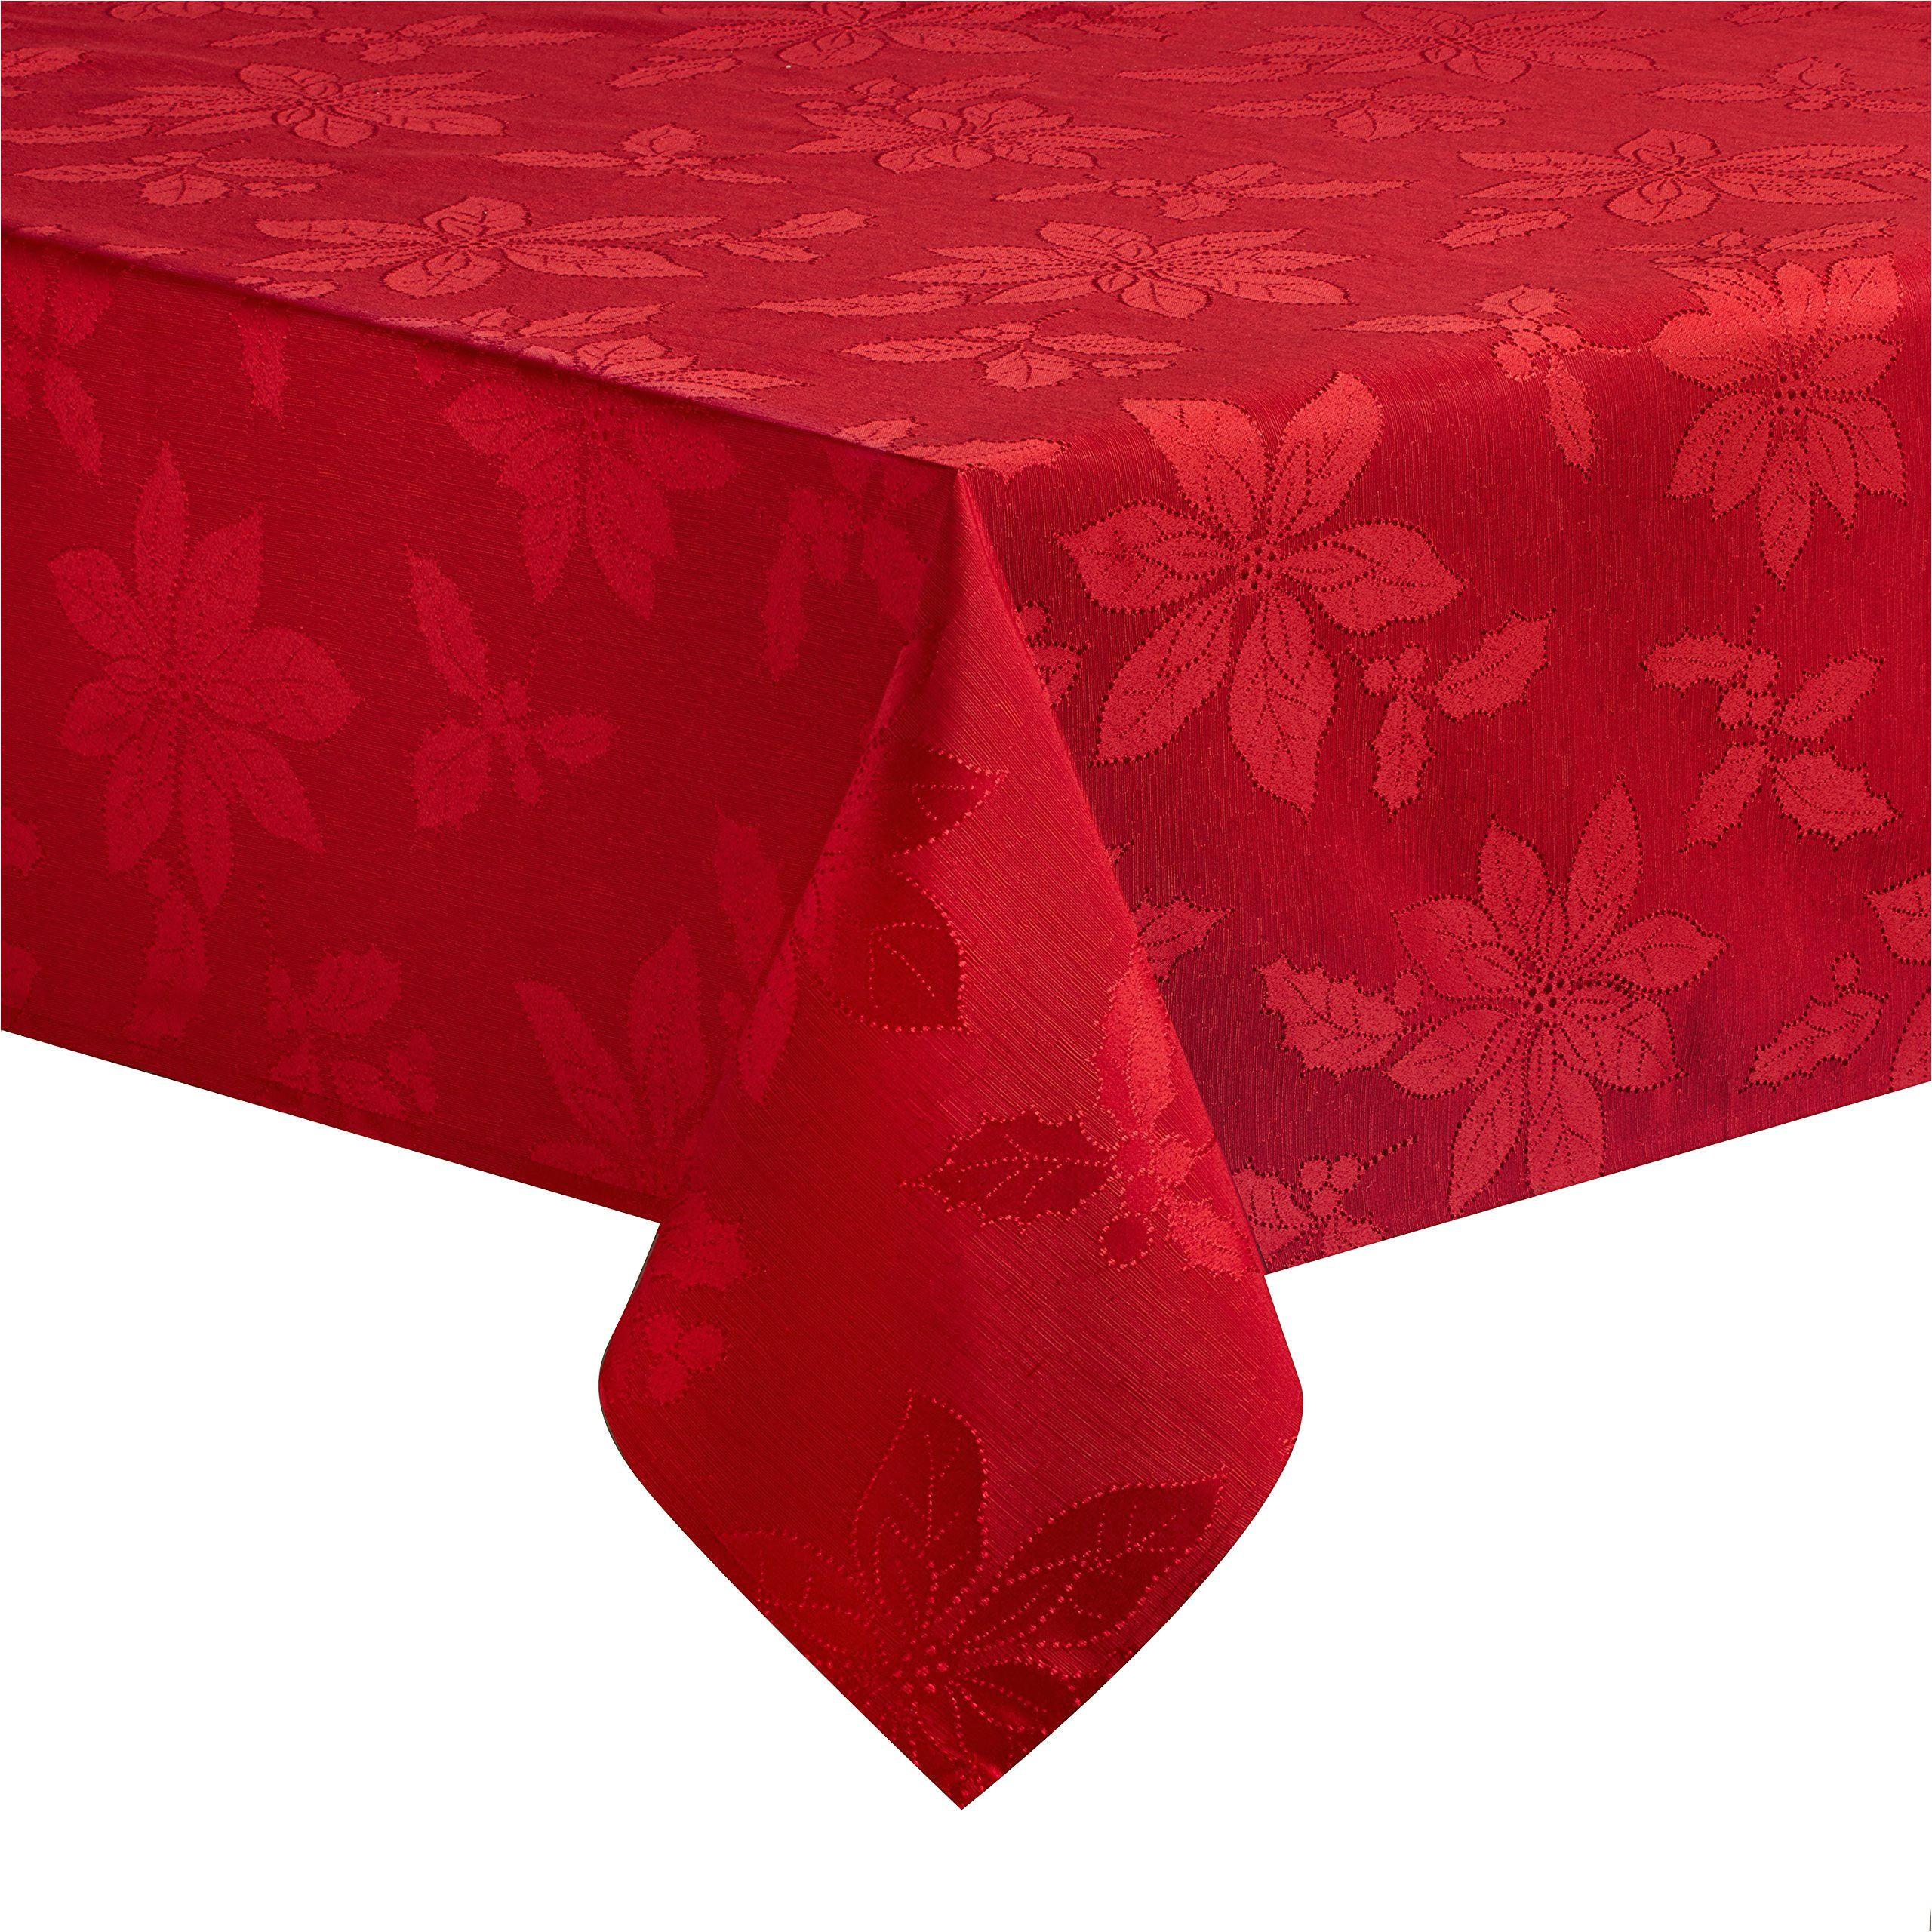 60 X 84 Tablecloth Fits What Size Table Poinsettia Legacy Damask Christmas Tablecloth Red 60 X 84